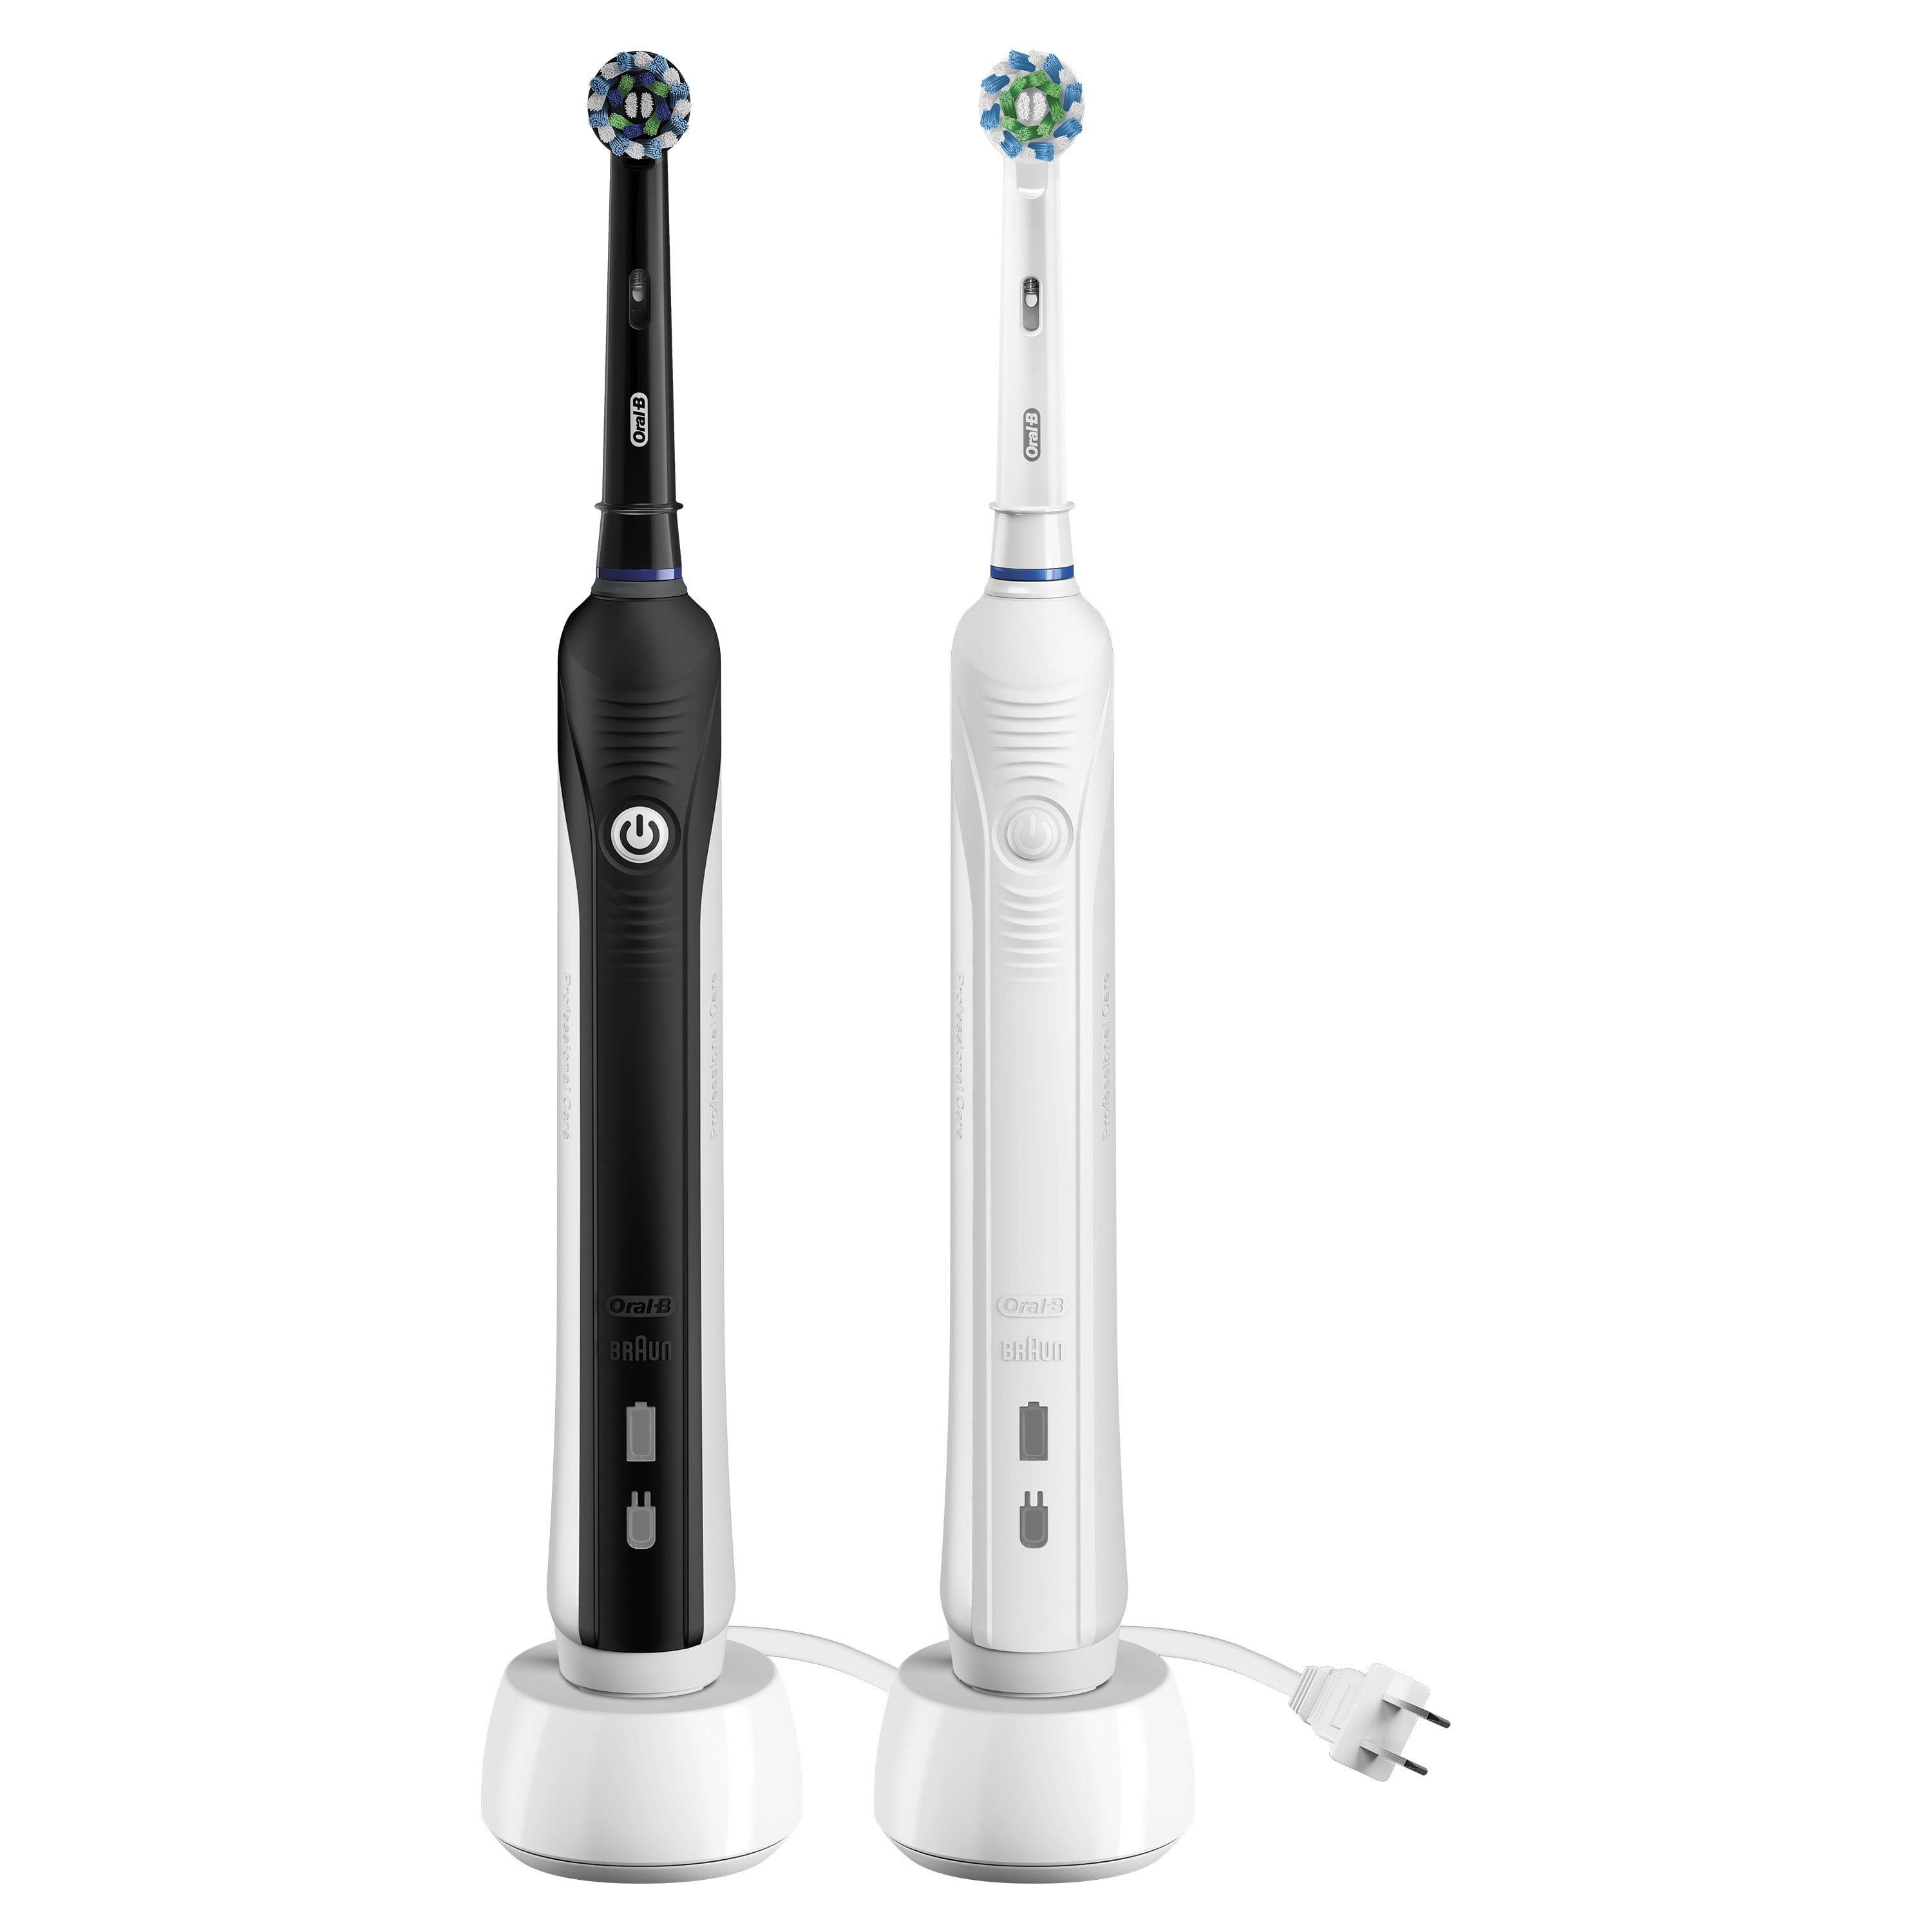 oral-b-pro-1000-crossaction-electric-toothbrush-black-white-2-pack